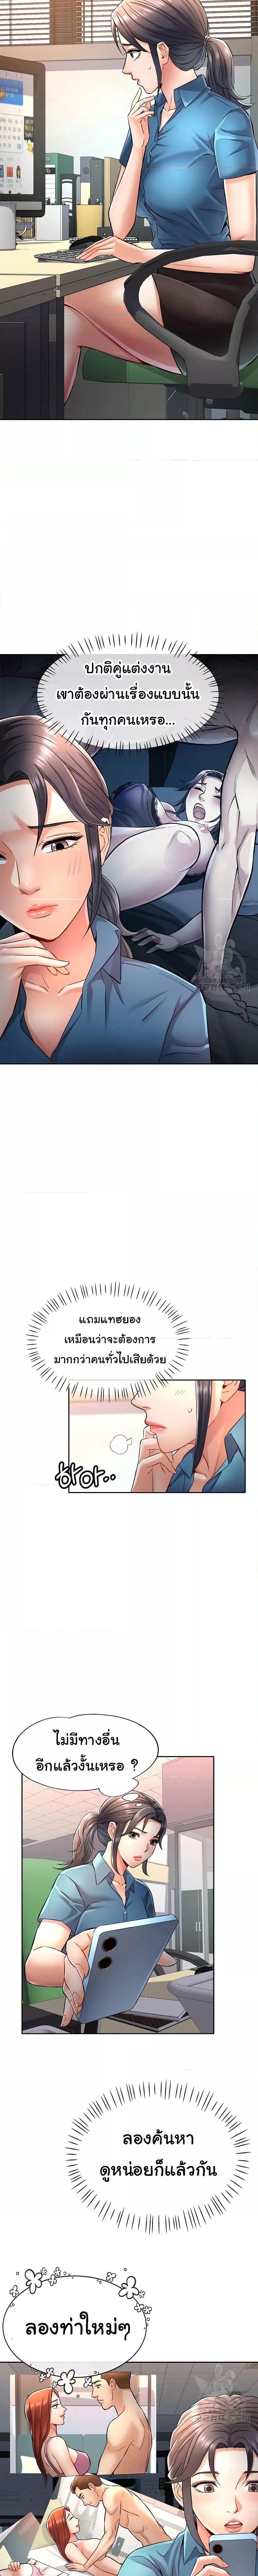 In Her Place ตอนที่ 7 ภาพ 8